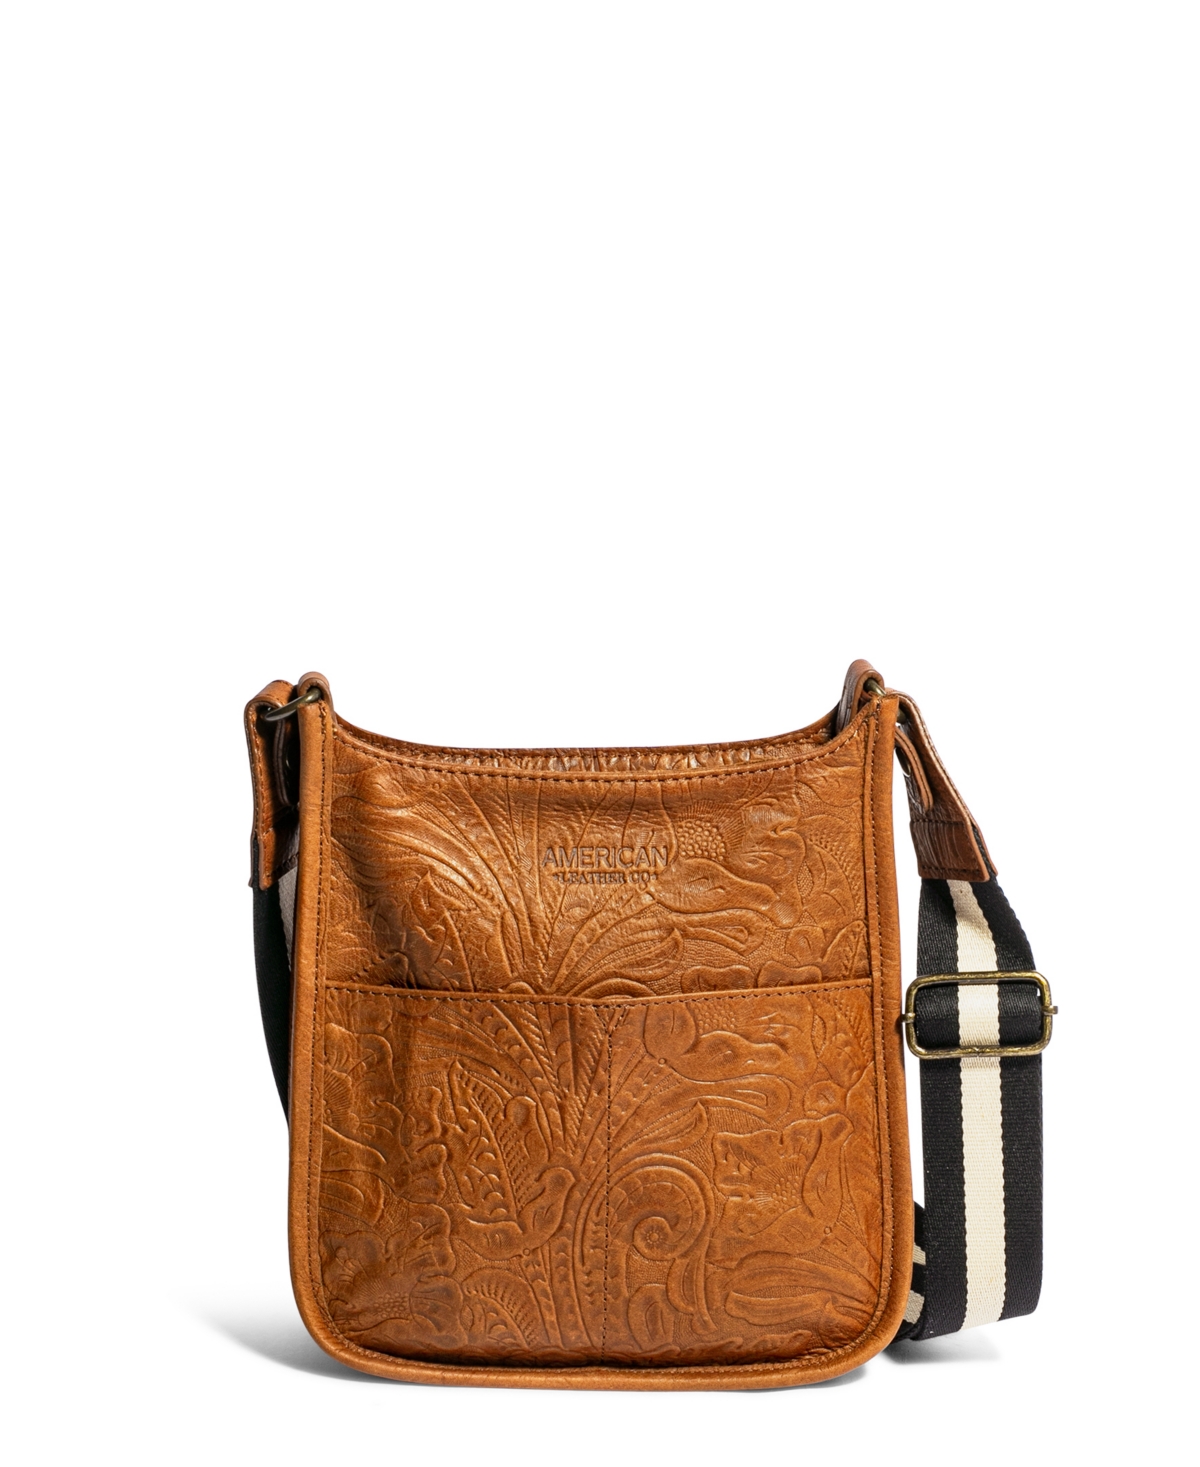 Women's Cali Crossbody with Webbed Strap - Cafe Latte Tooled